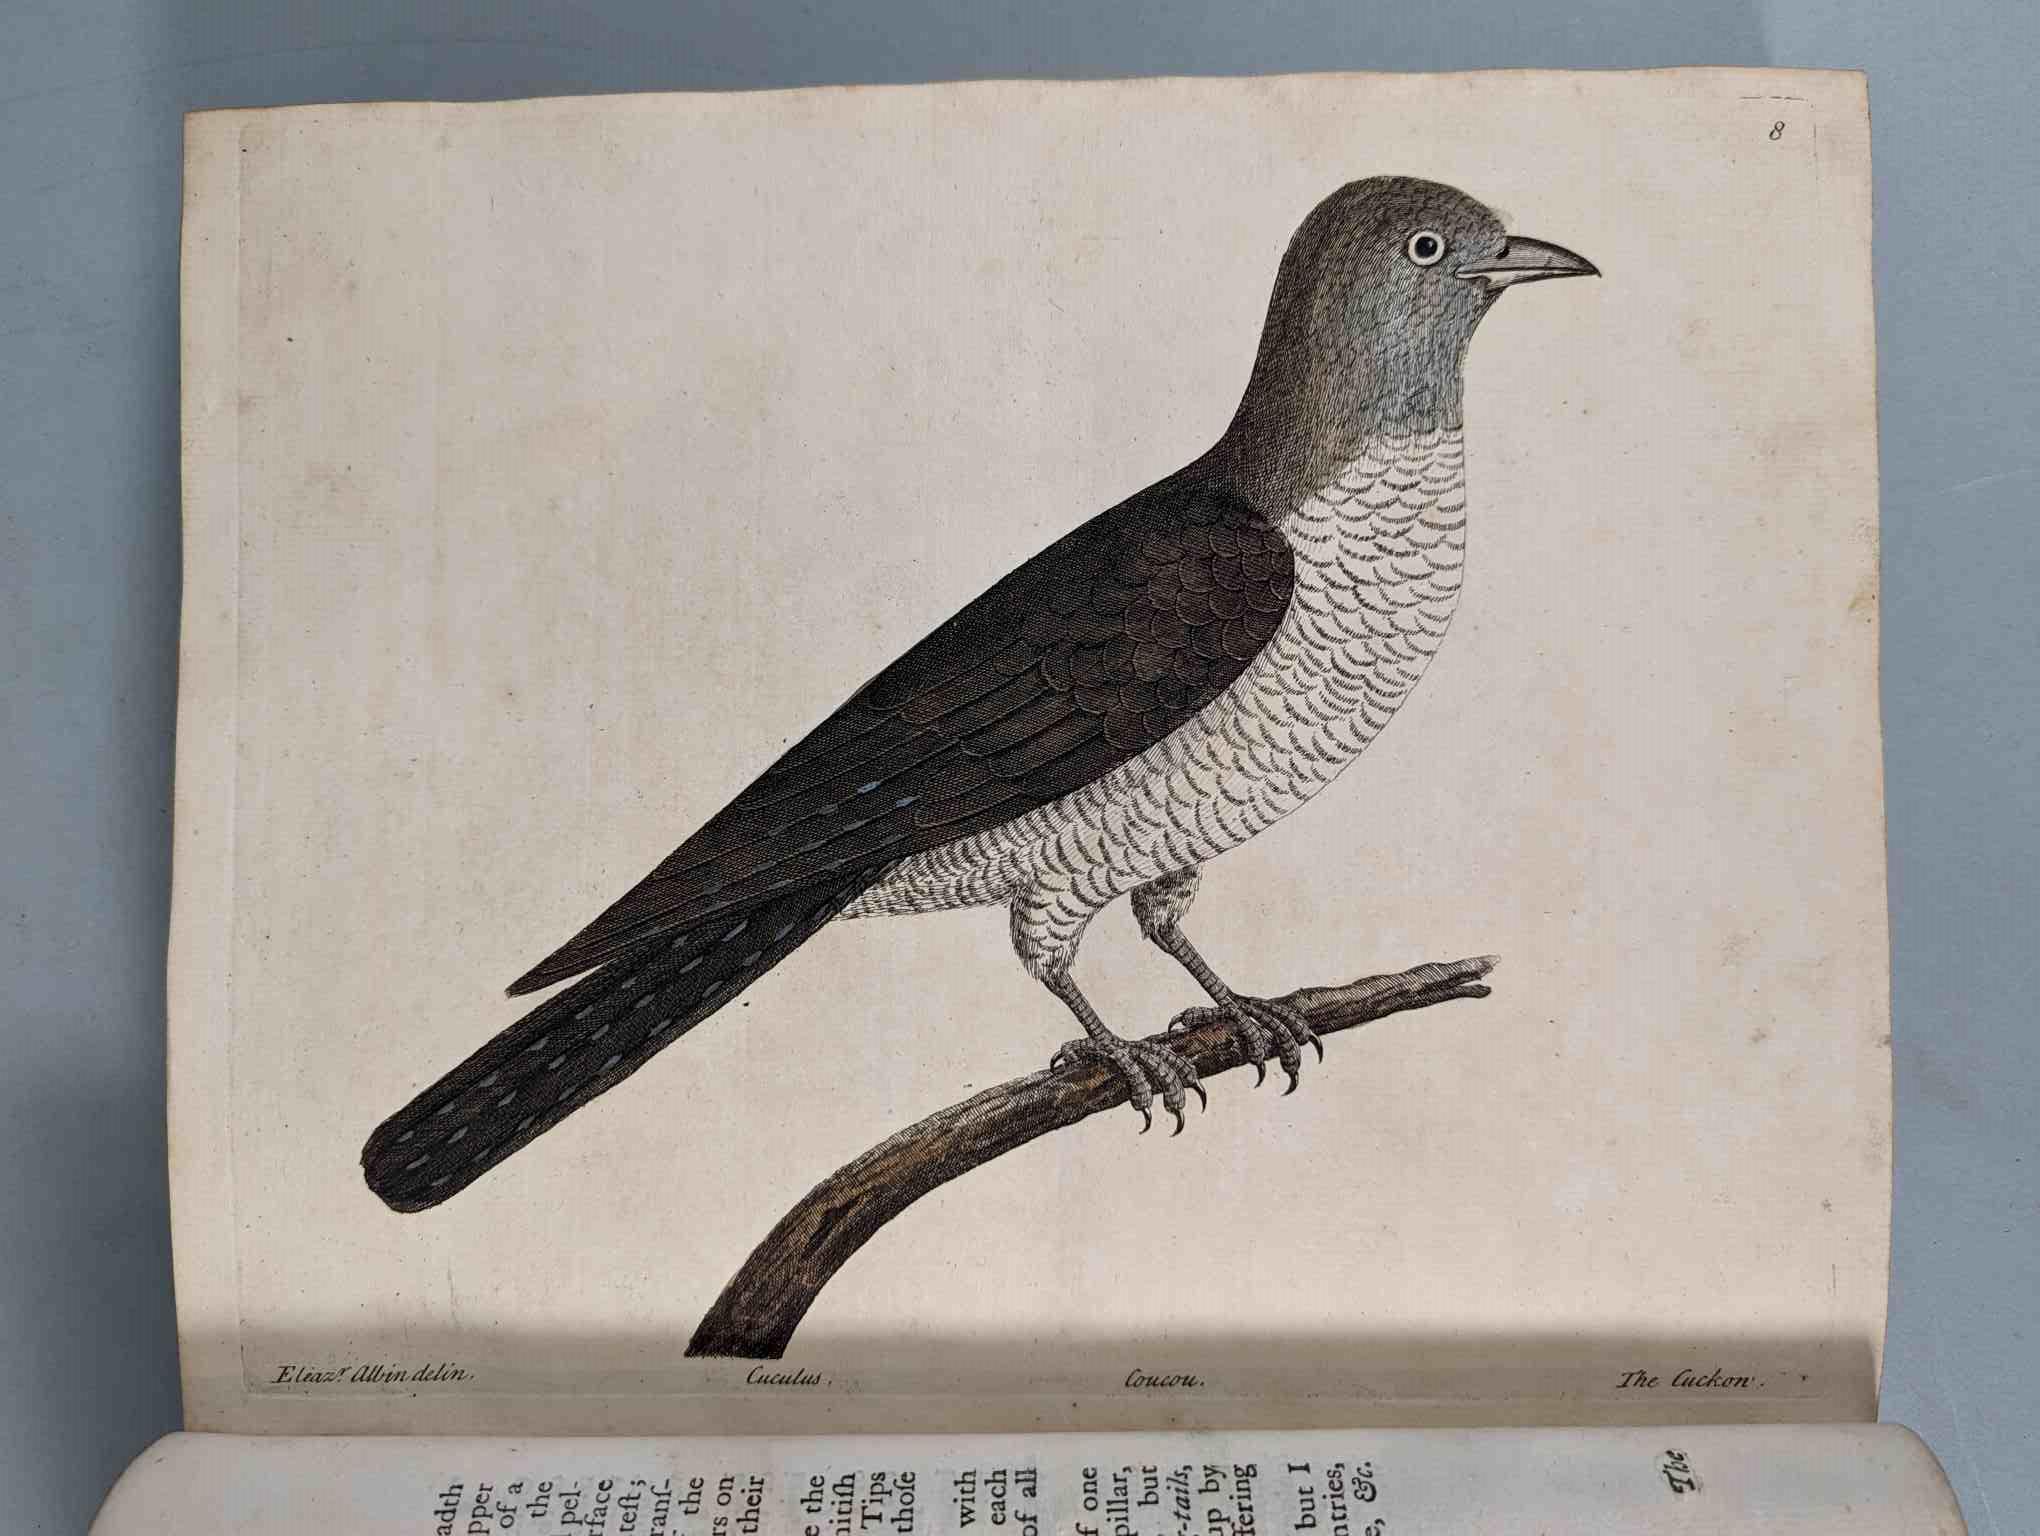 ALBIN, Eleazar. A Natural History of Birds, to which are added, Notes and Observations by W. - Image 7 of 208